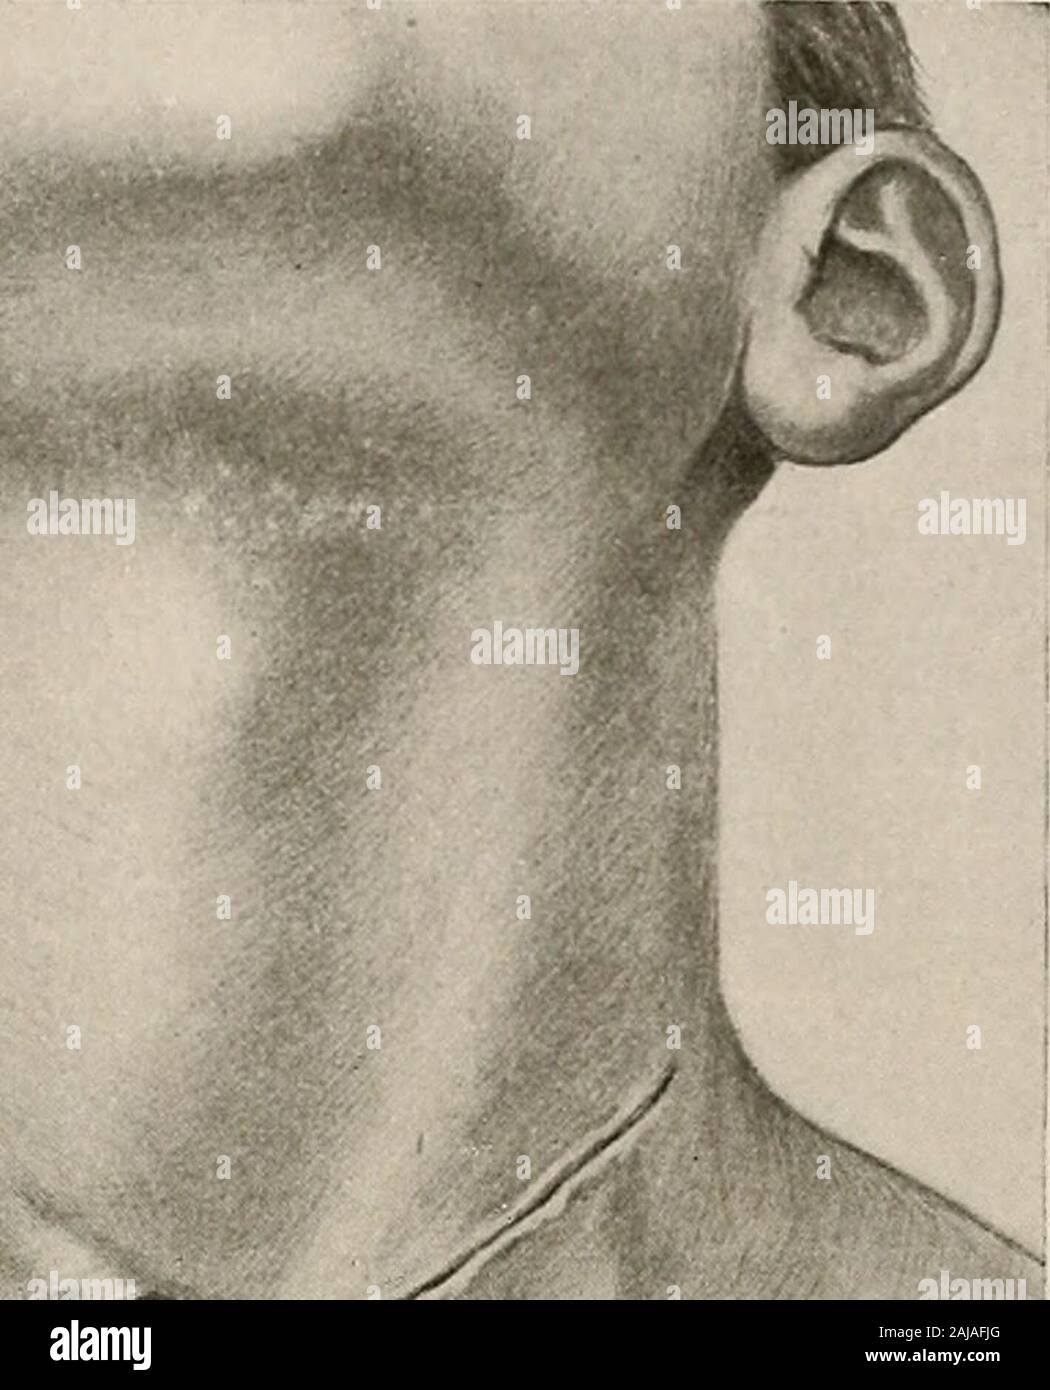 Surgical treatment; a practical treatise on the therapy of surgical diseases for the use of practitioners and students of surgery . Fig. 10S2.—Operation for Goiter. Operation completed. The divided muscles have been sewed, a drain has been placed, and the wound closed with subcuticular suture. STE^NO-THYRJDIPM/ STERNO-HYOID3^ ?£3mA 0i Stock Photo